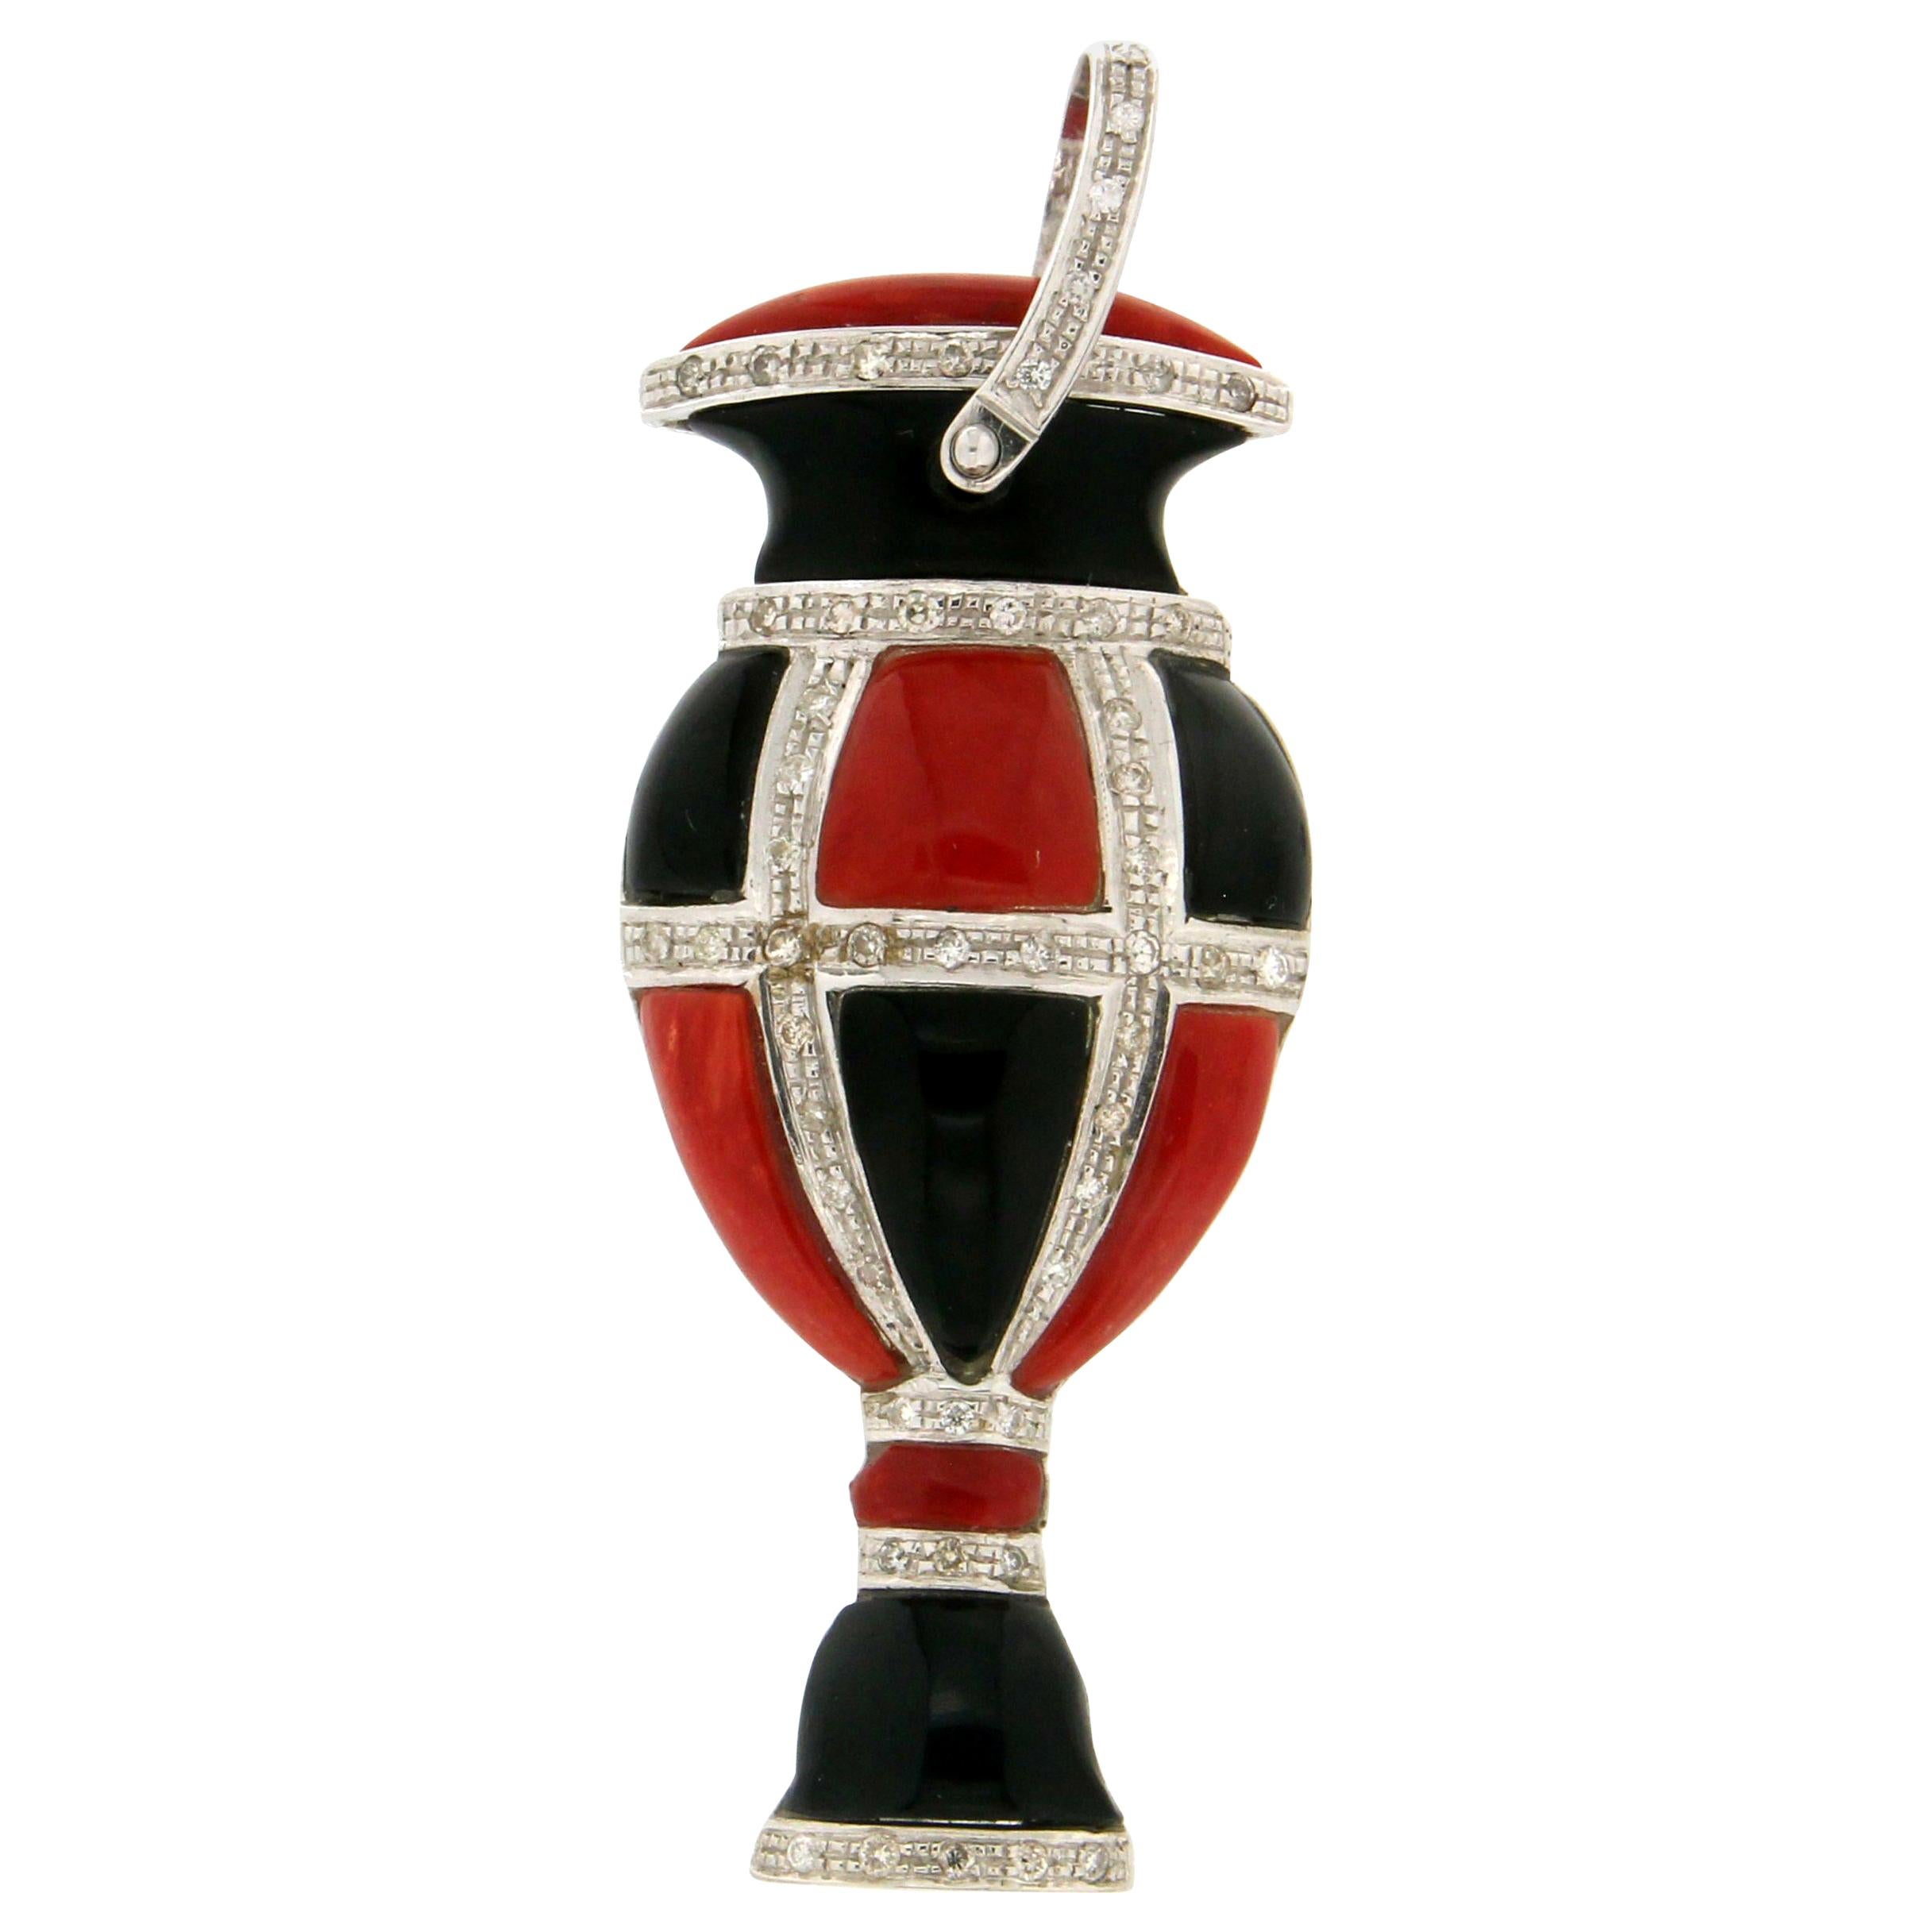 Handcraft Coral and Onyx Vase 18 Karat White Gold Diamonds Pendant Necklace For Sale